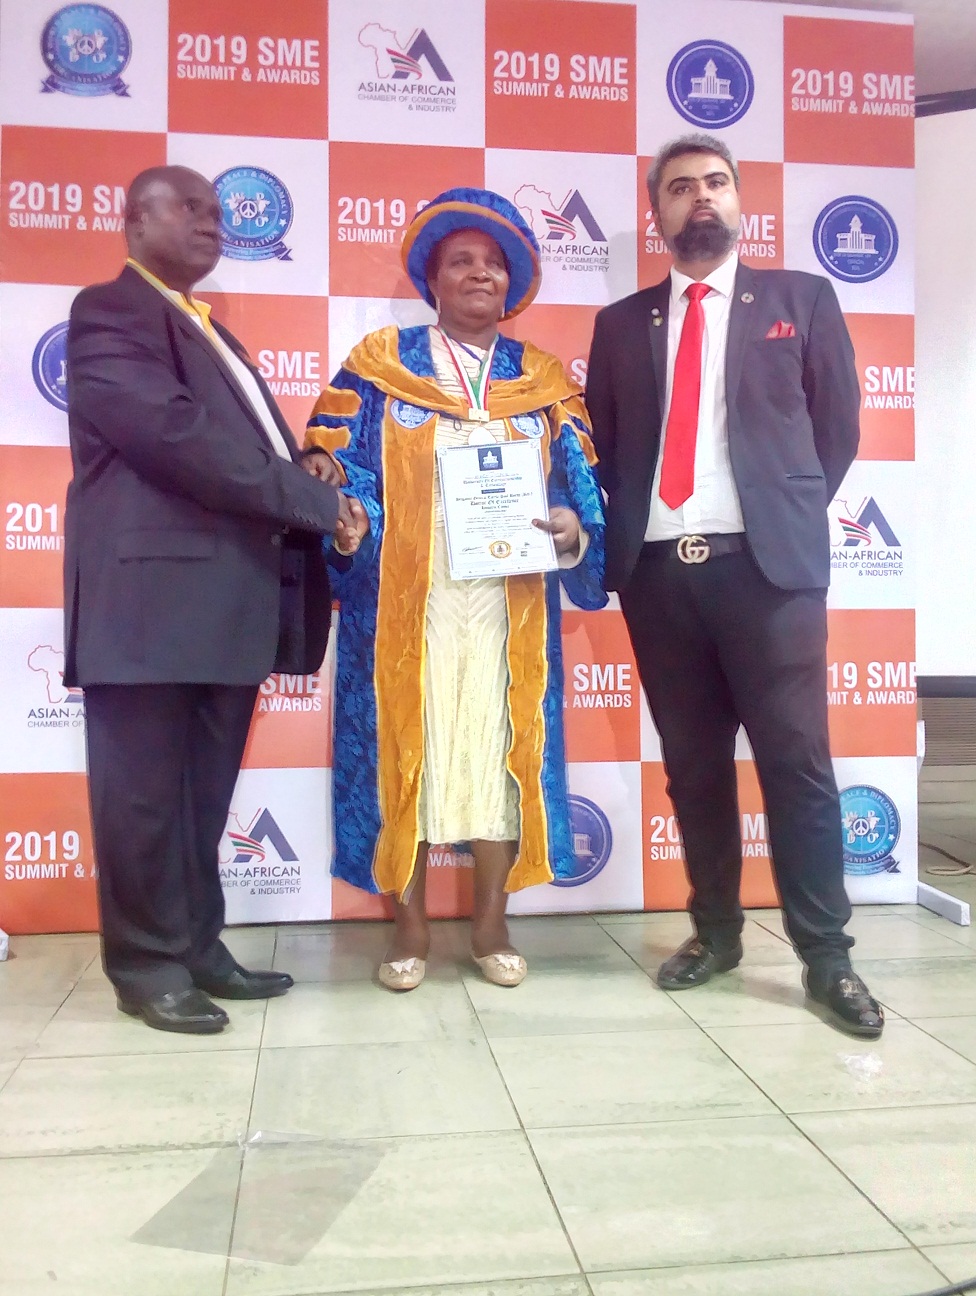 dr-mrs-mabel-adekunbi-ajala-leaving-ceremony-with-honorary-doctoral-award-from-the-uet-during-2019-sme-summit-held-in-lagos-on-saturday-27-april-2019